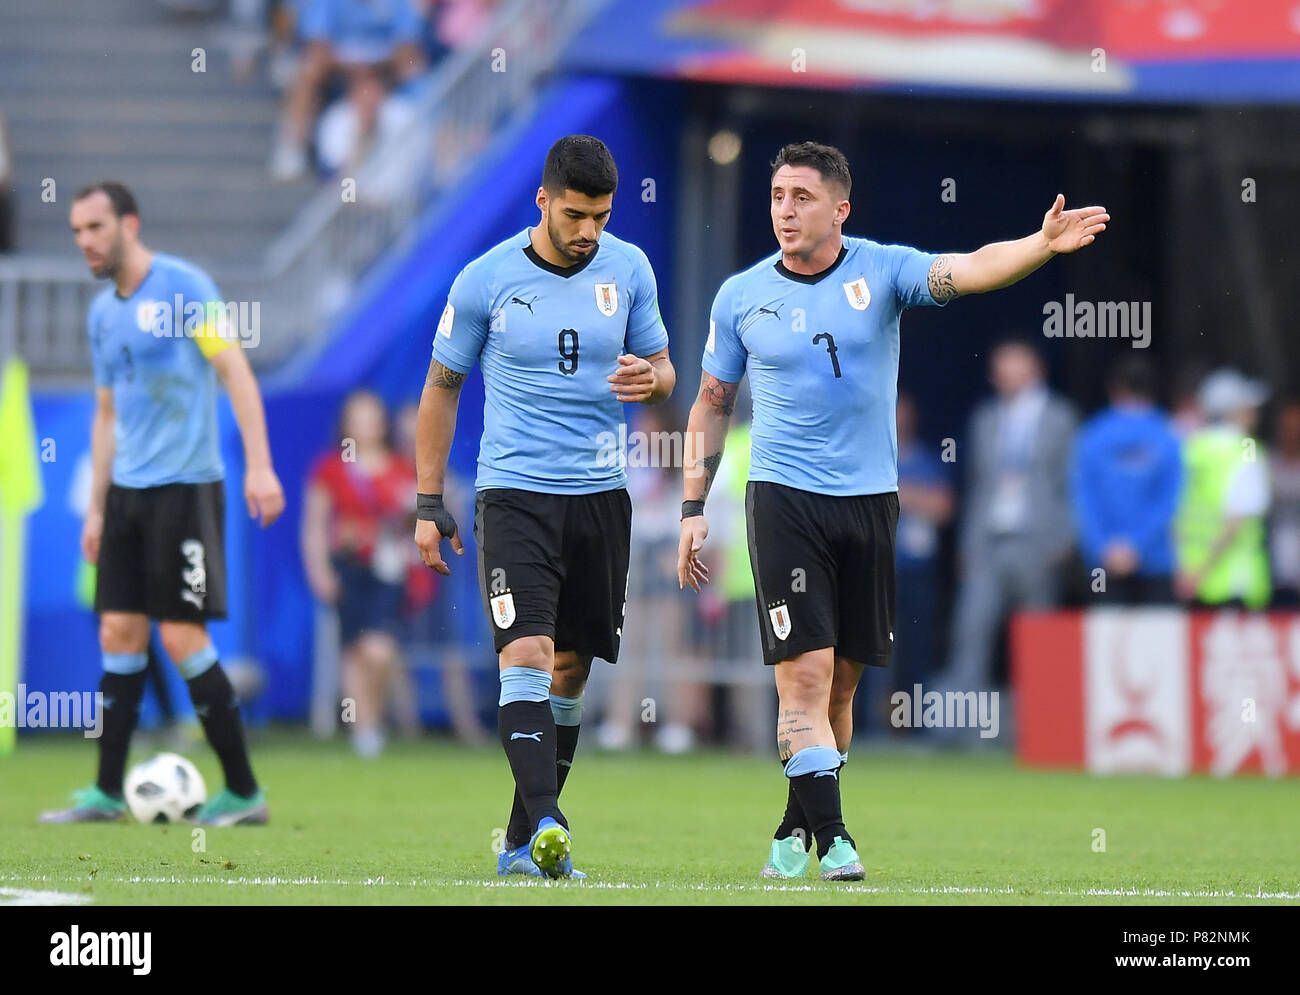 SAMARA, RUSSIA - JUNE 25: Luis Suarez and Cristian Rodriguez of Uruguay reacts during the 2018 FIFA World Cup Russia group A match between Uruguay and Russia at Samara Arena on June 25, 2018 in Samara, Russia. (Photo by Lukasz Laskowski/PressFocus/MB Media) Stock Photo